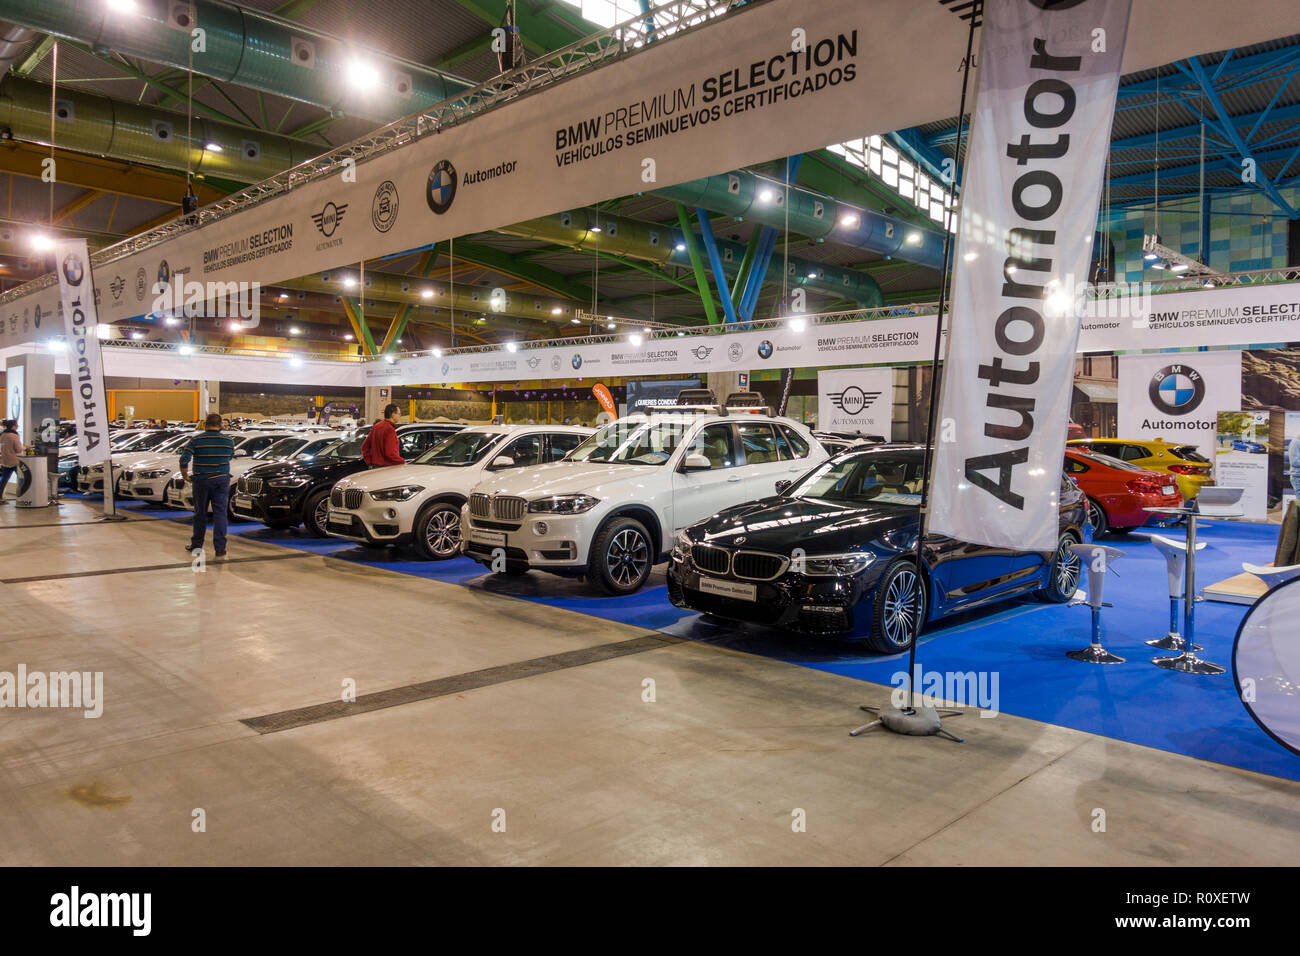 Second hand car show,BMW cars on display, fair, cars for sale in Malaga, Spain. Stock Photo